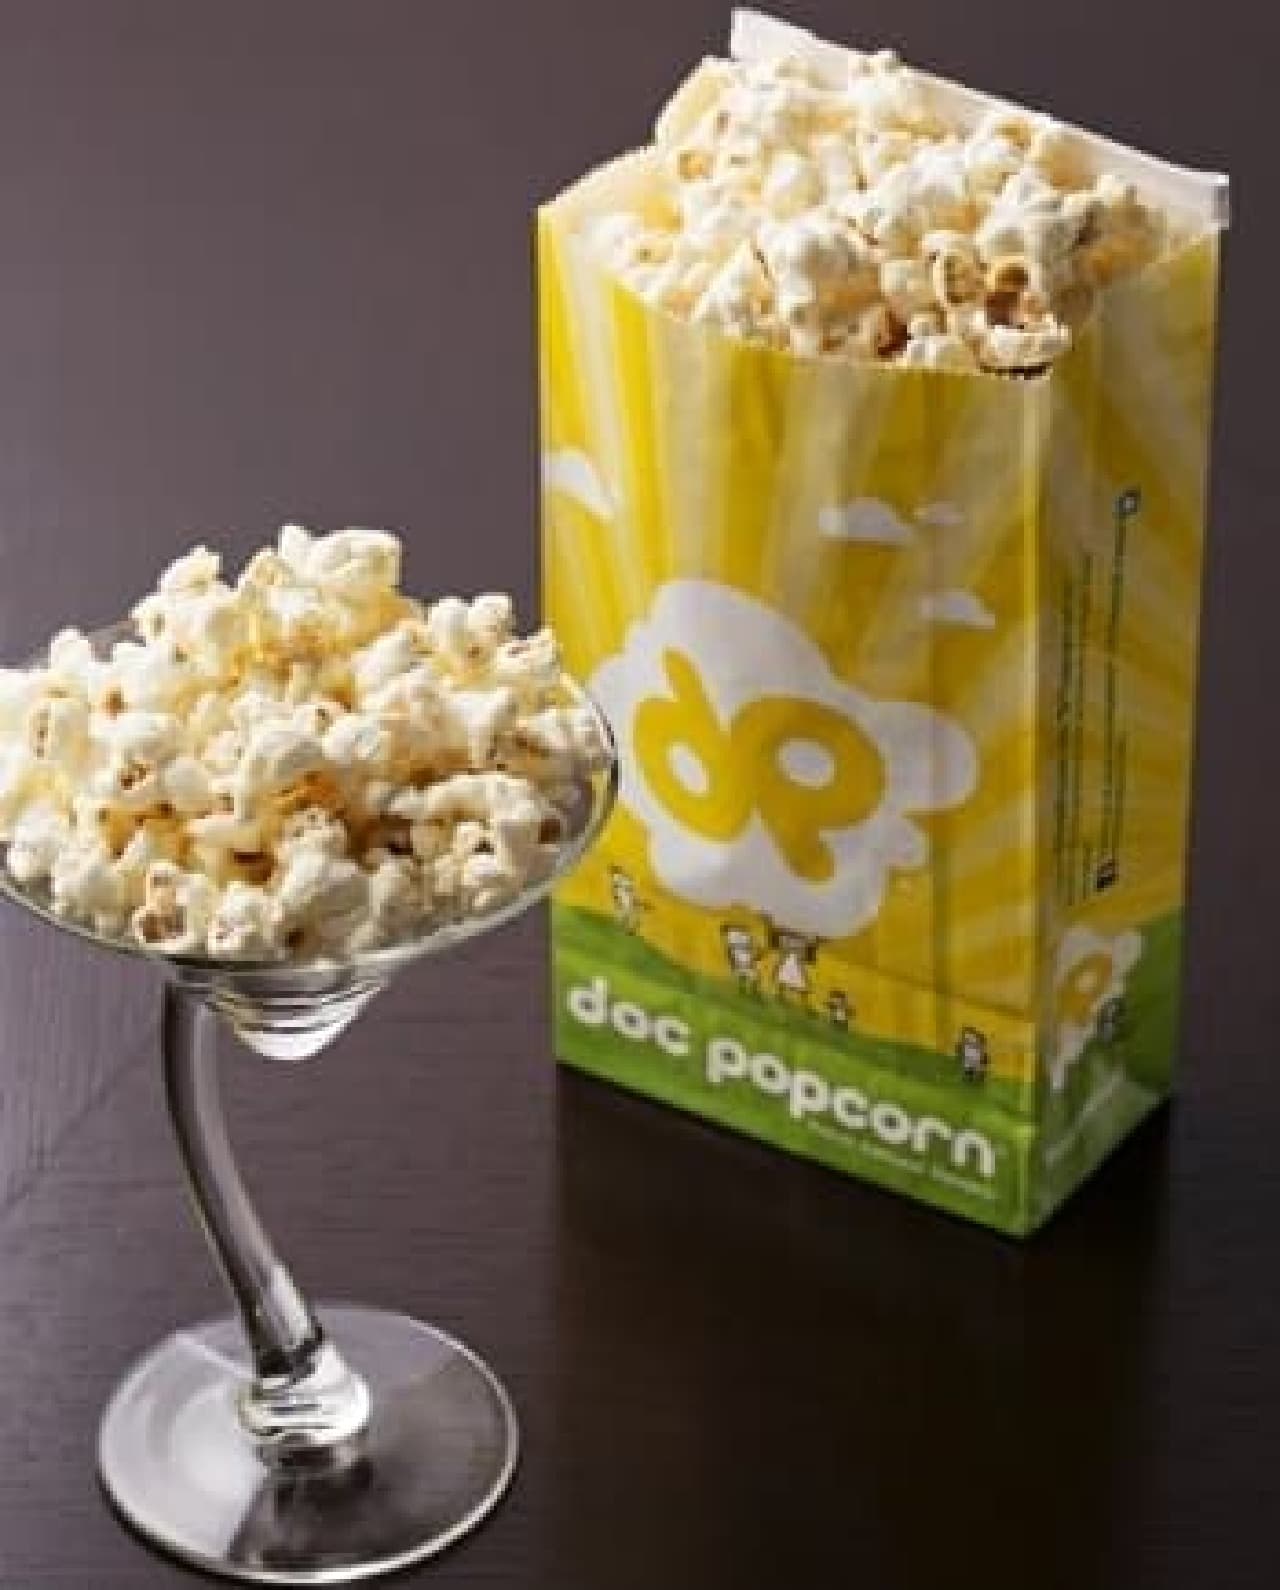 Monthly "Free Popcorn Day" will be held in December!